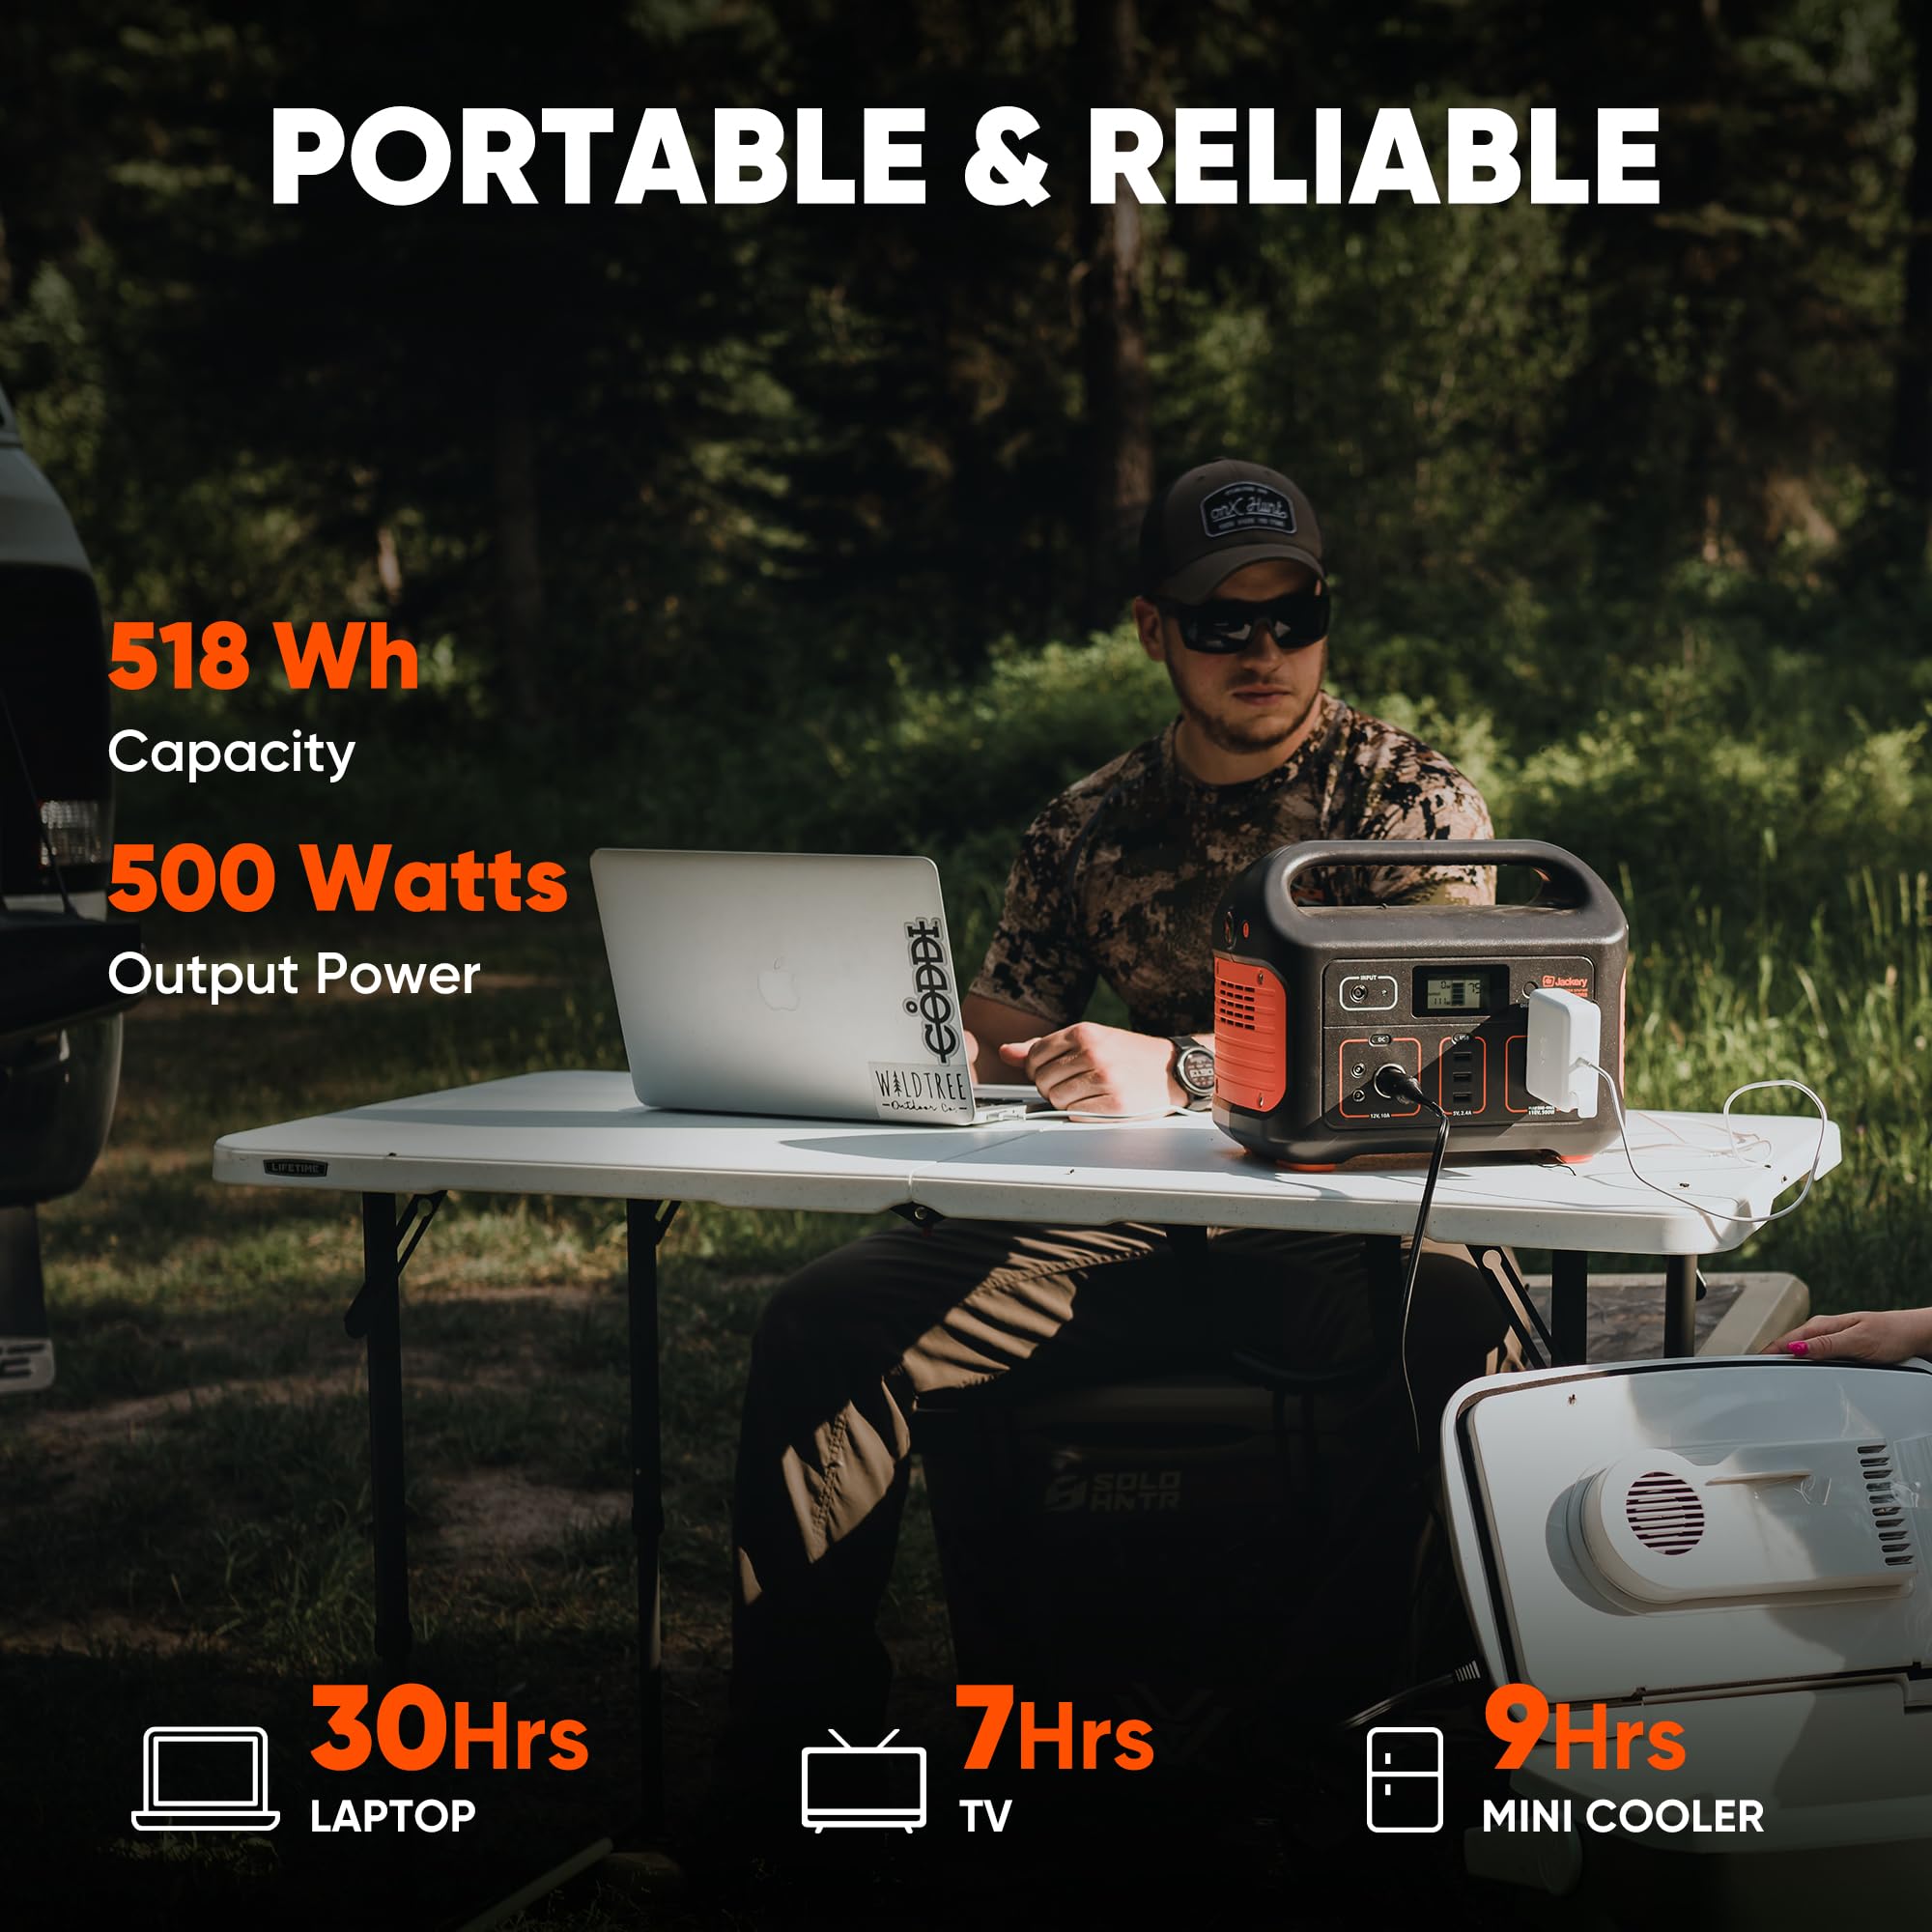 Jackery Portable Power Station Explorer 500, 518Wh Outdoor Solar Generator Mobile Lithium Battery Pack with 110V/500W AC Outlet for Home Use, Emergency Backup,Road Trip Camping (Solar Panel Optional)